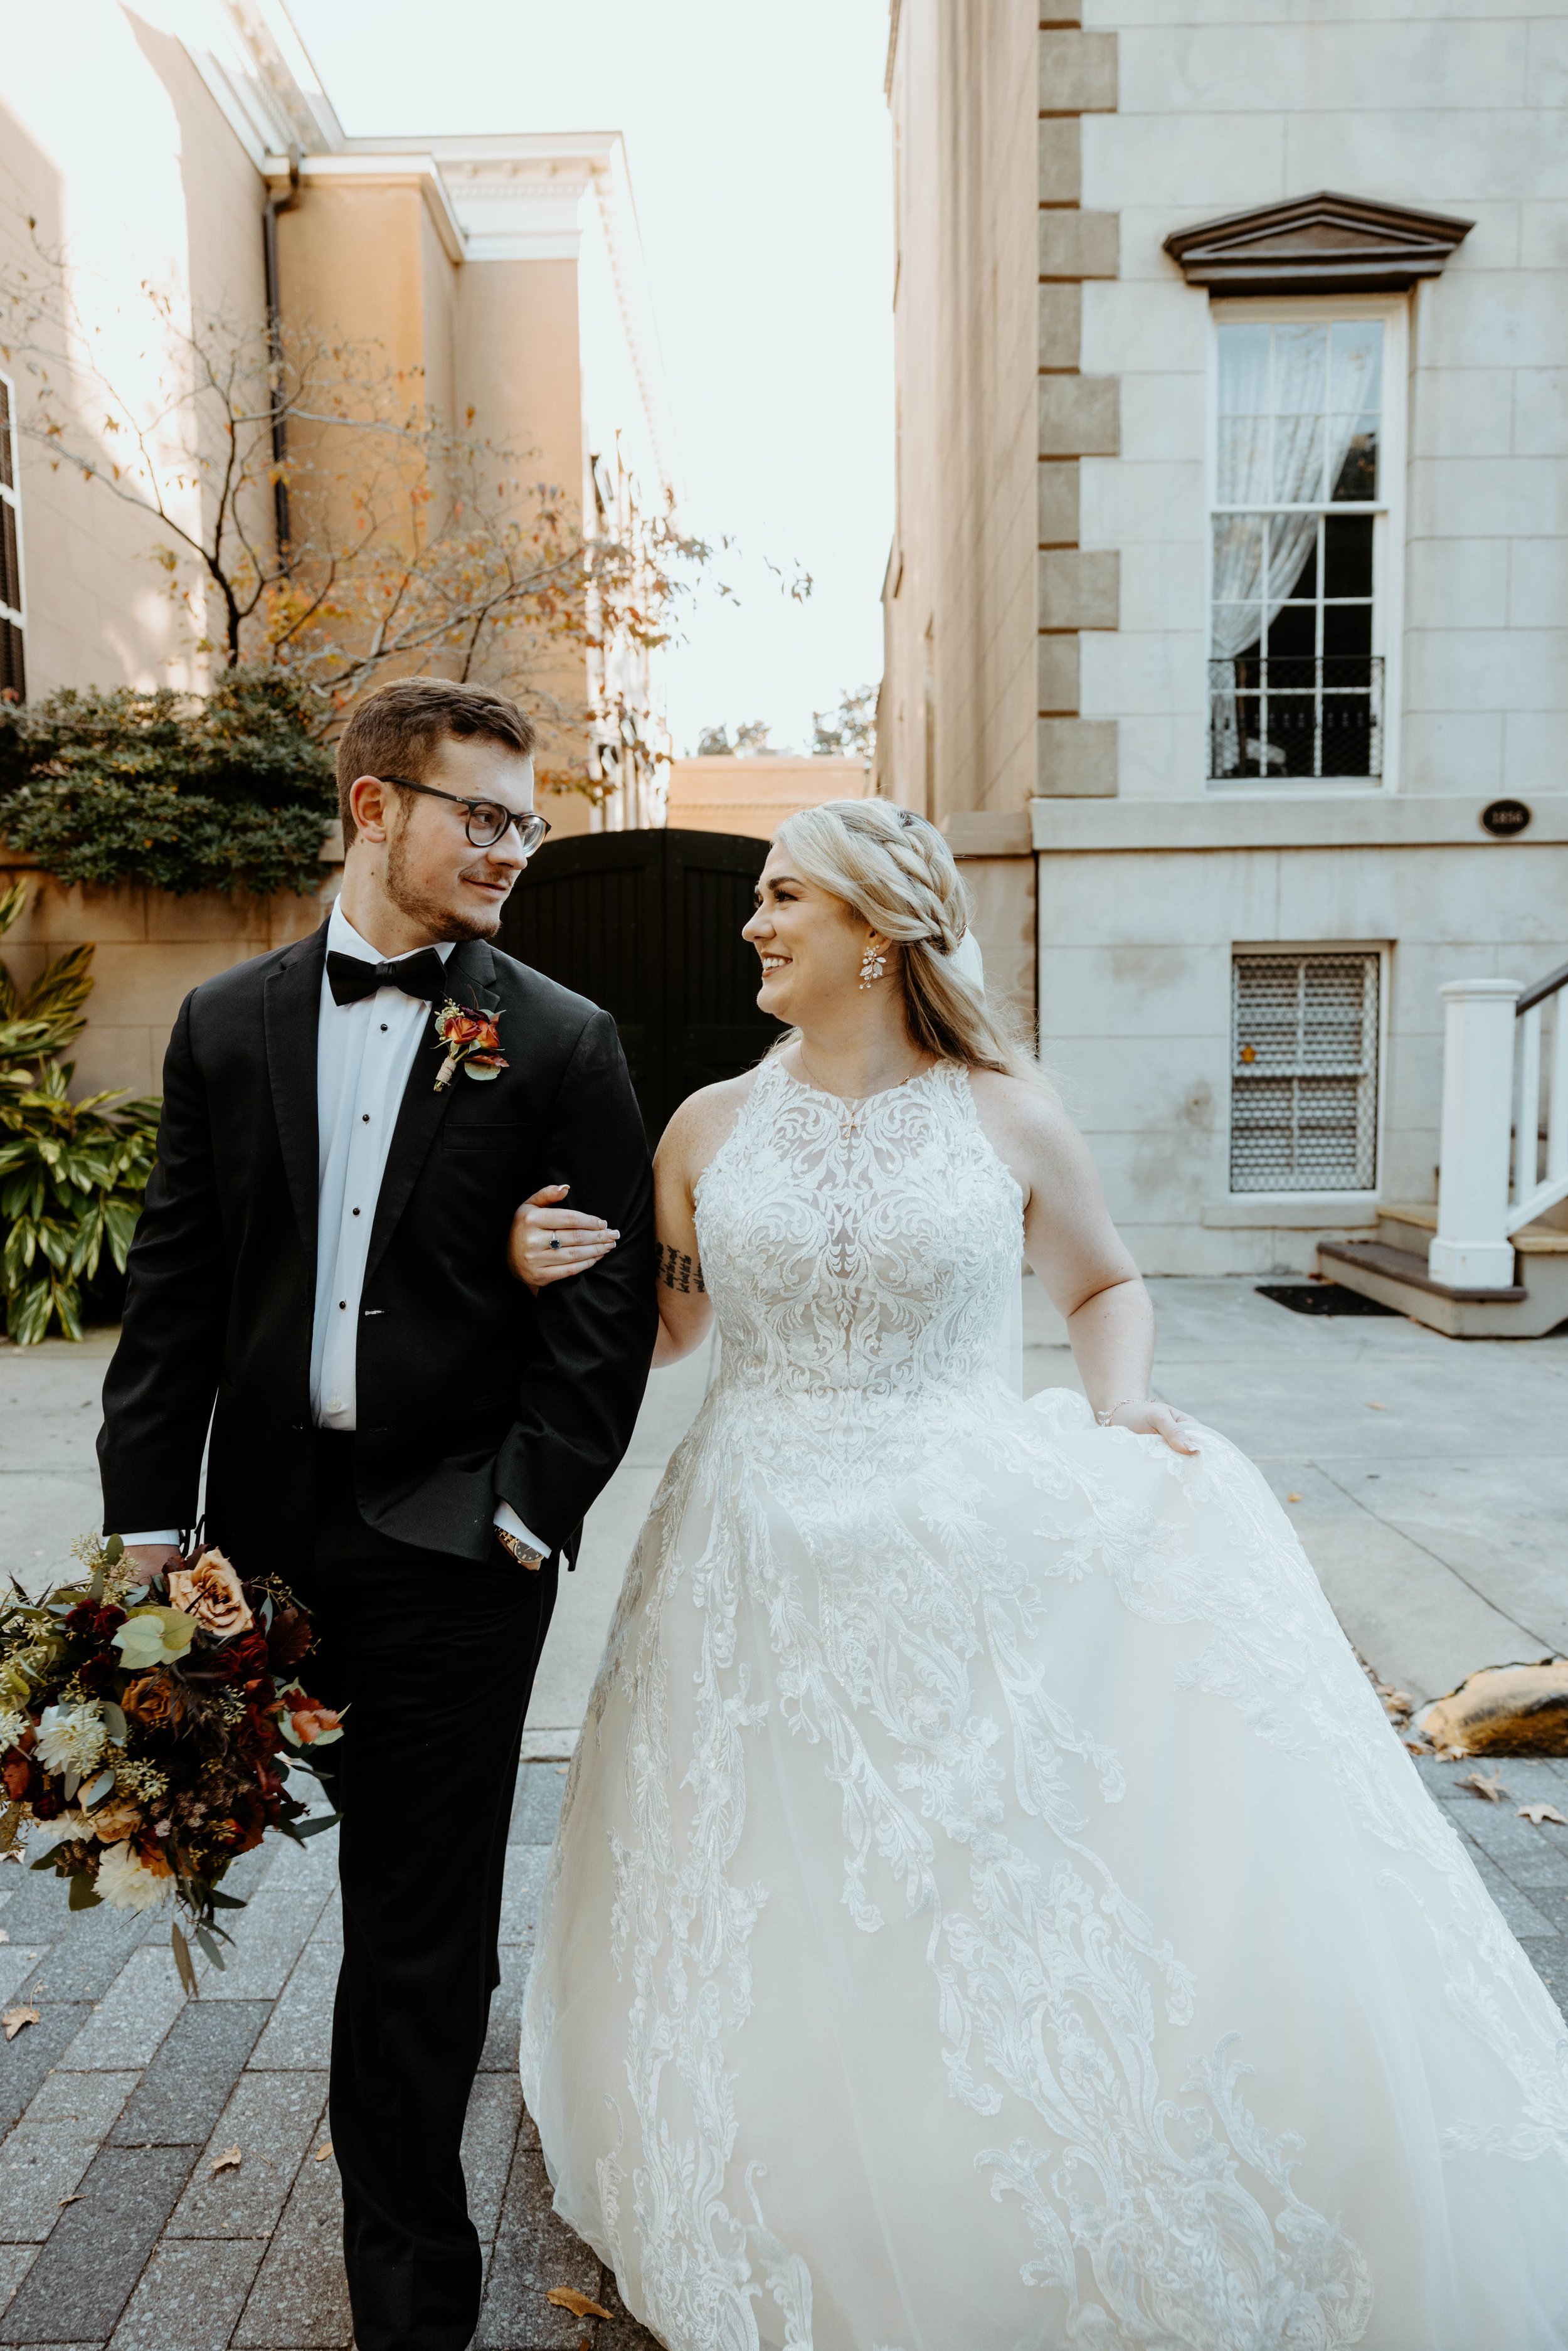 Ivory-and-beau-bride-ansley-bought-sparkly-and-traditional-highneck-ballgown-at-savannah-bridal-shop-gets-married-at-cathedral-with-the-help-of-ivory-and-beau-who-created-floral-peices-for-the-ceremony-and-reception-in-their-savannah-florwer-shop-20.jpg